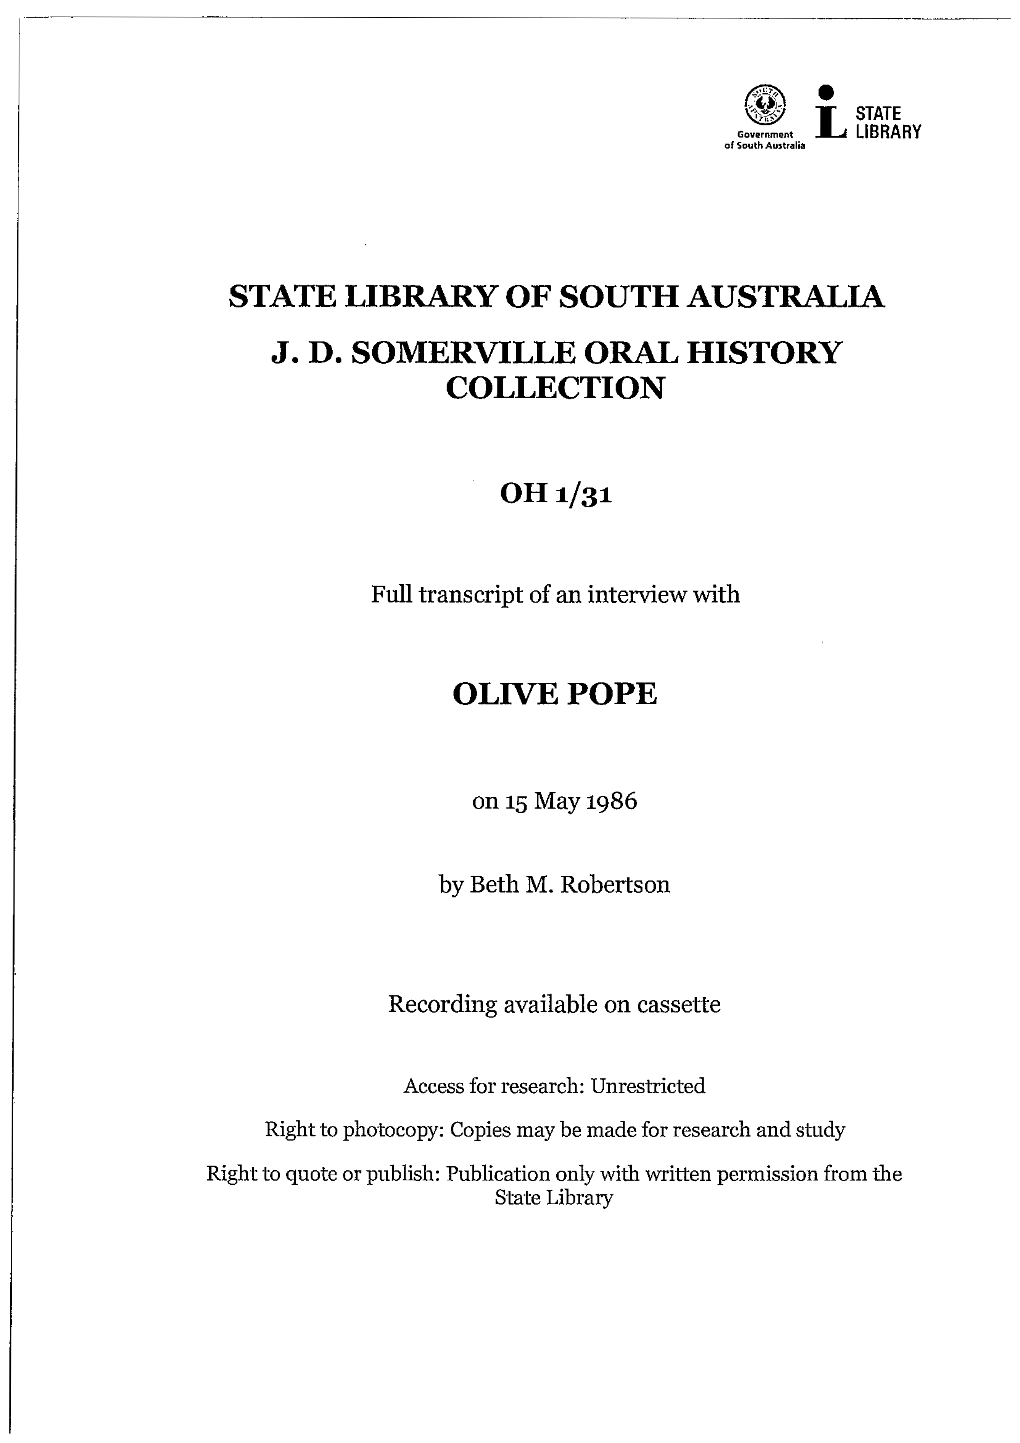 State Library of South Australia J. D. Somerville Oral History Collection